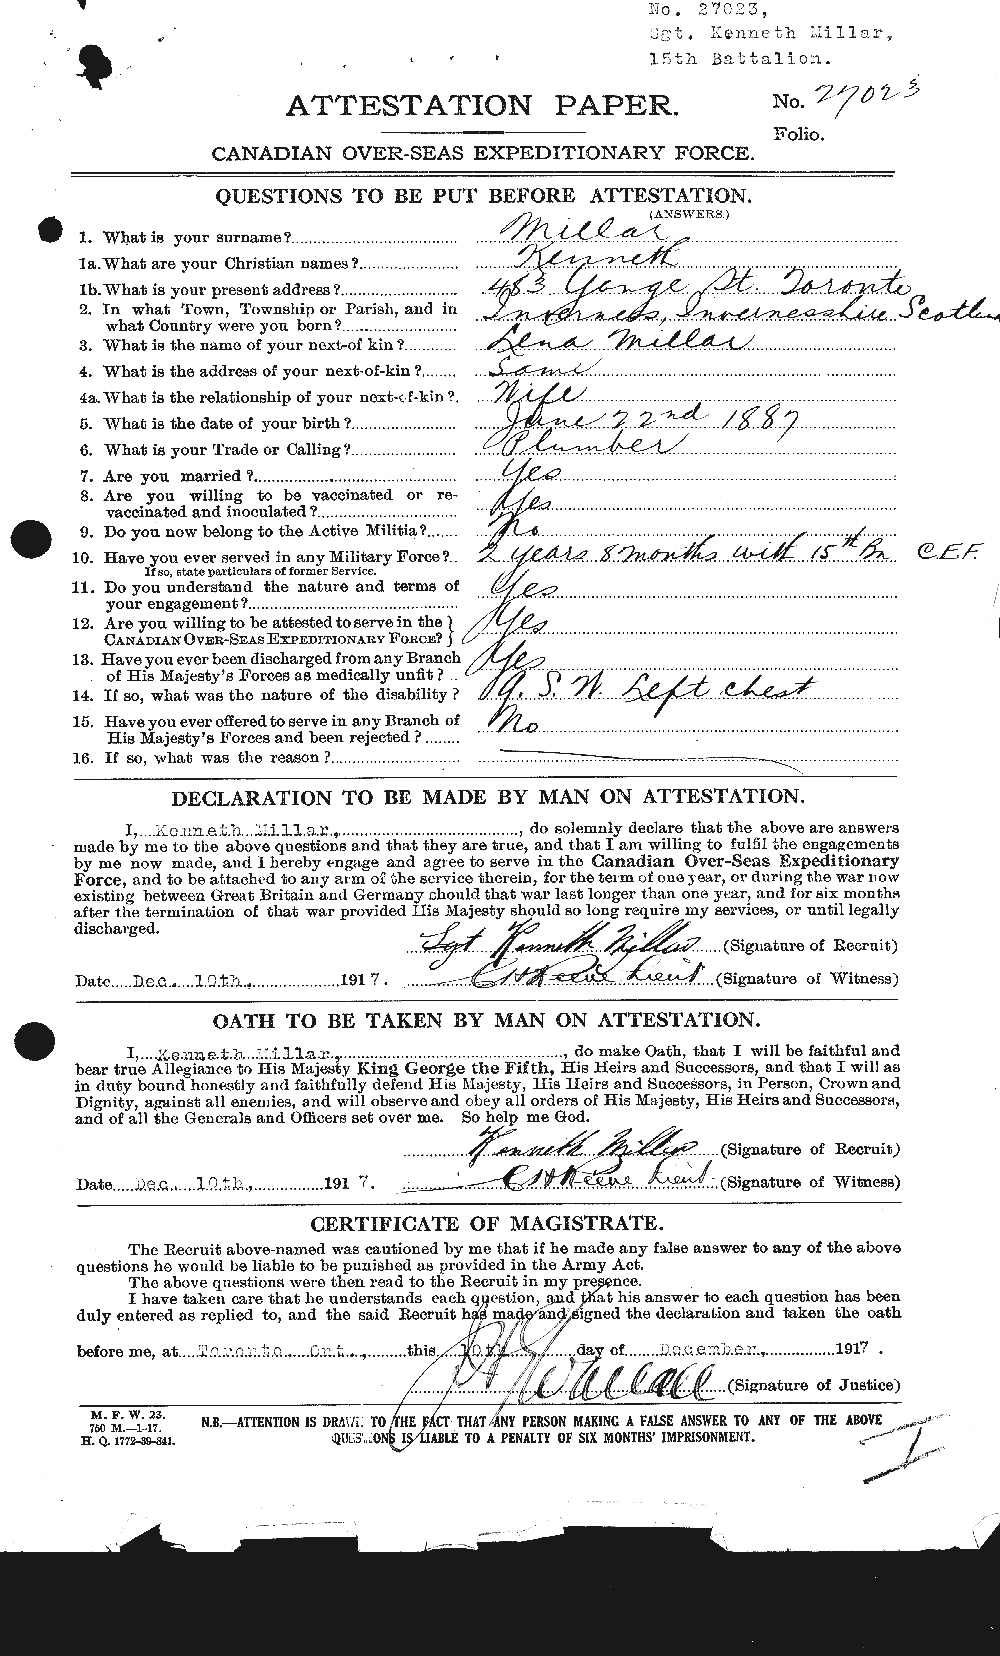 Personnel Records of the First World War - CEF 495335a